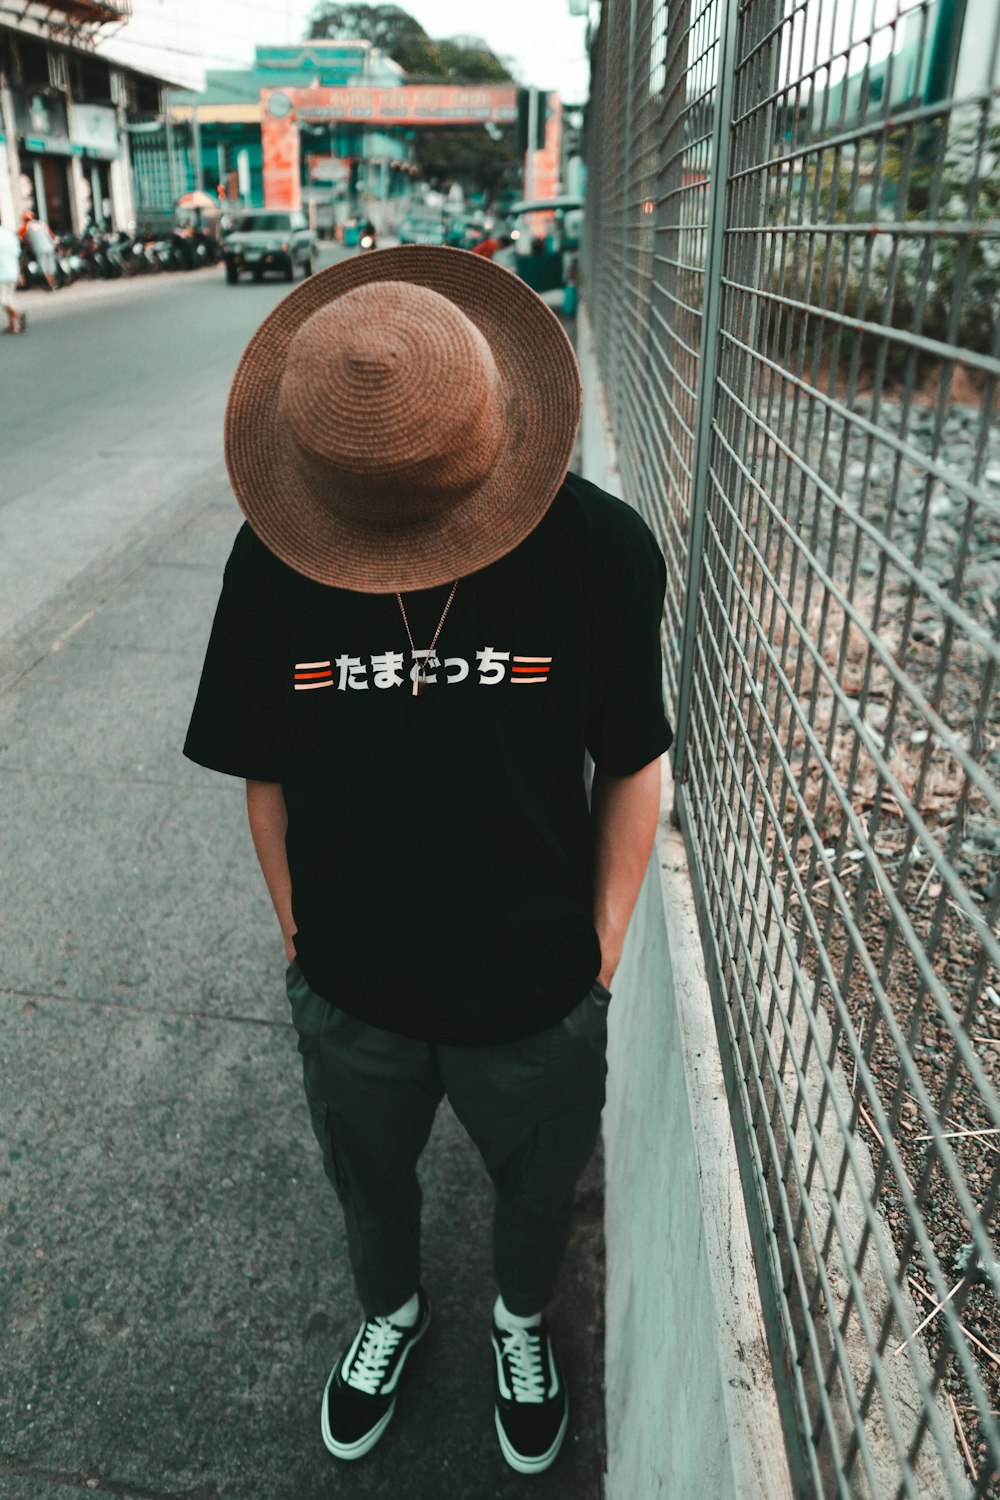 man in black t-shirt and brown hat standing on sidewalk during daytime